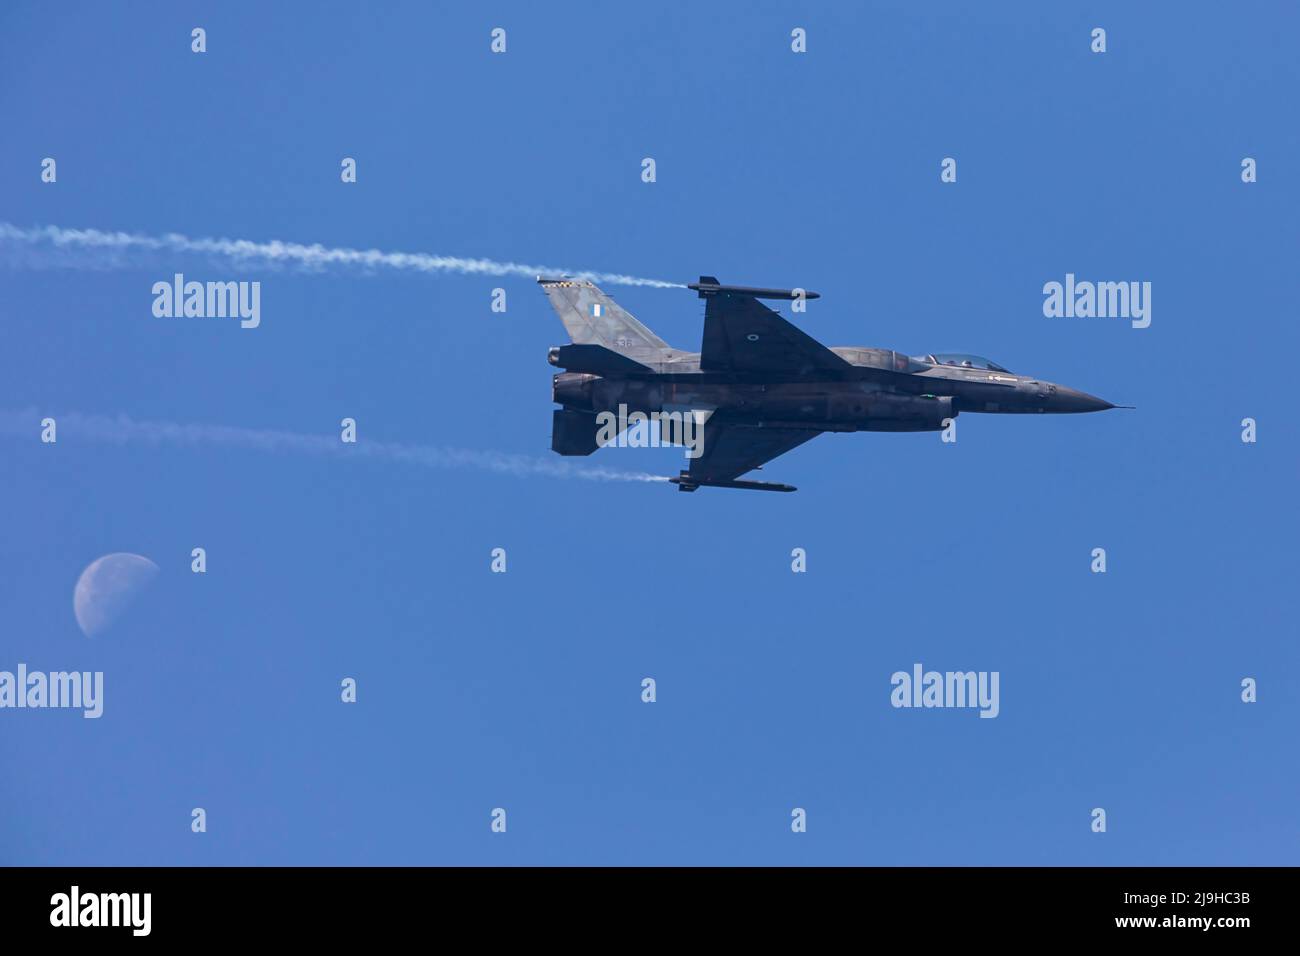 Thessaloniki, Greece - October 28, 2021: F-16 warplane flying during the military parade to celebrate the liberation of Thessaloniki Stock Photo